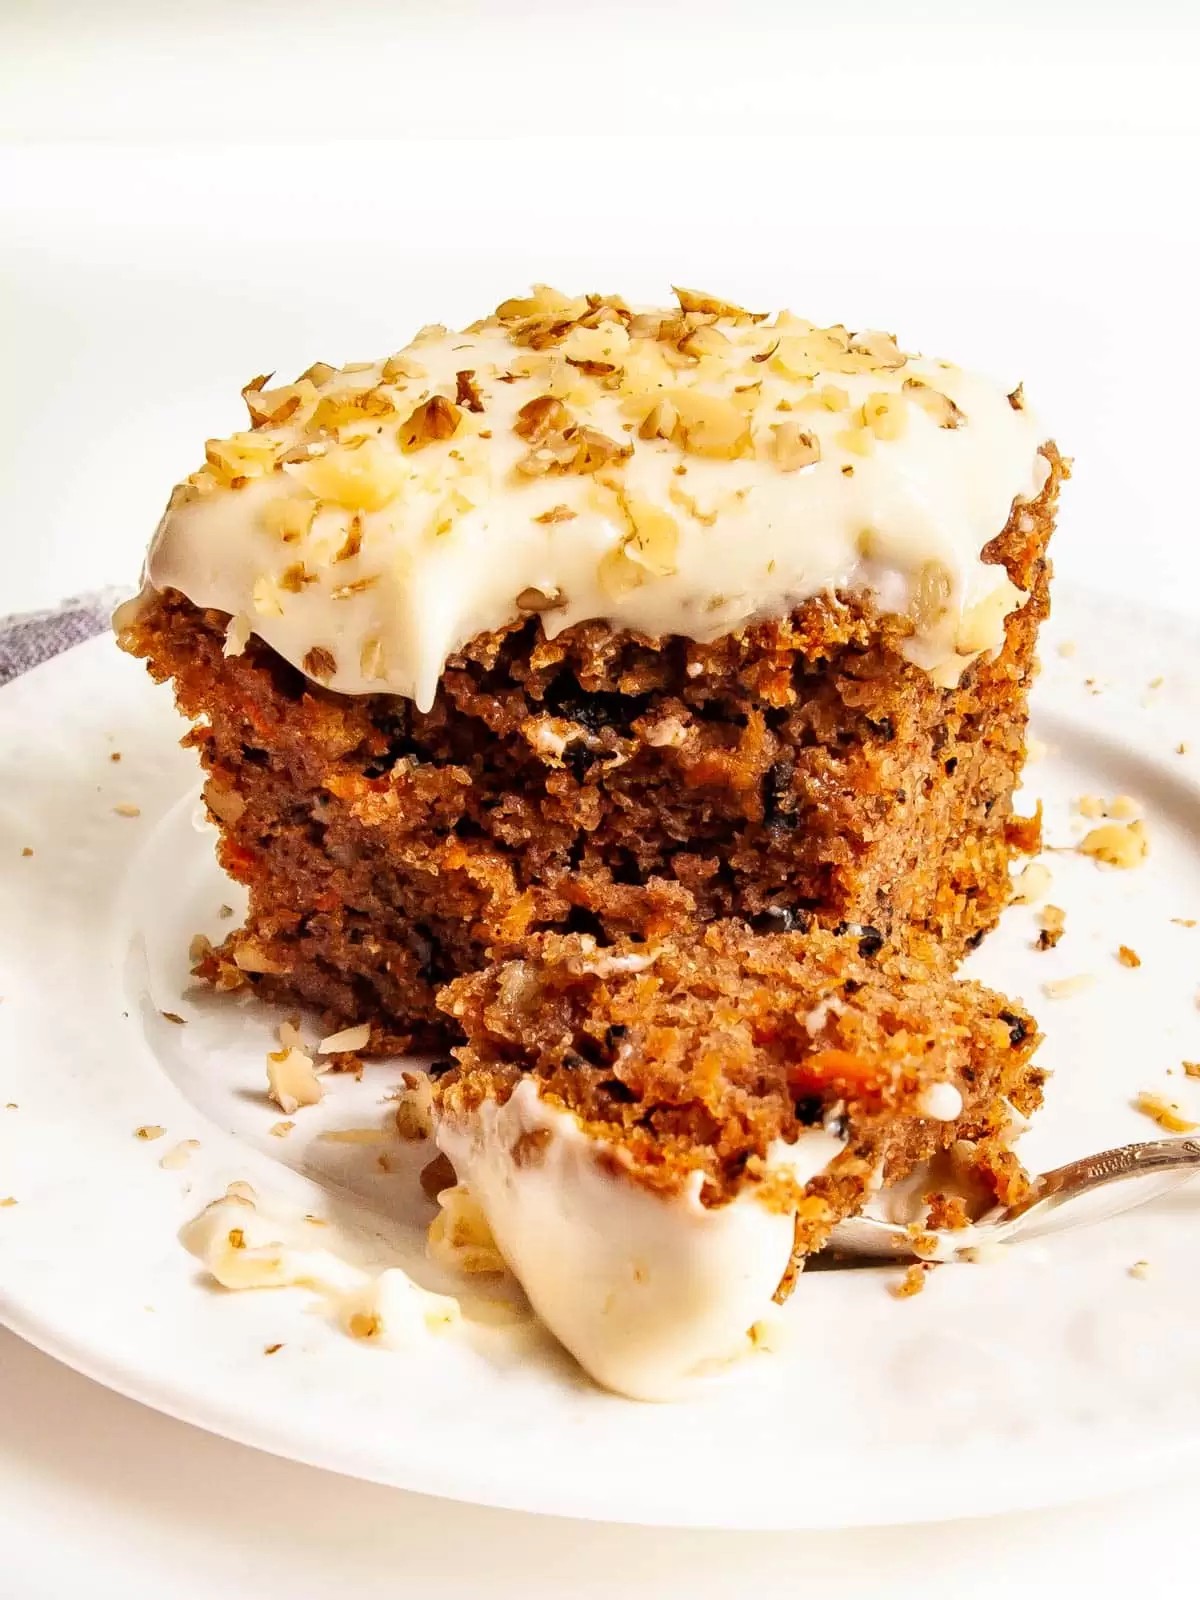 slice of carrot cake on a white plate with a bite taken out of it